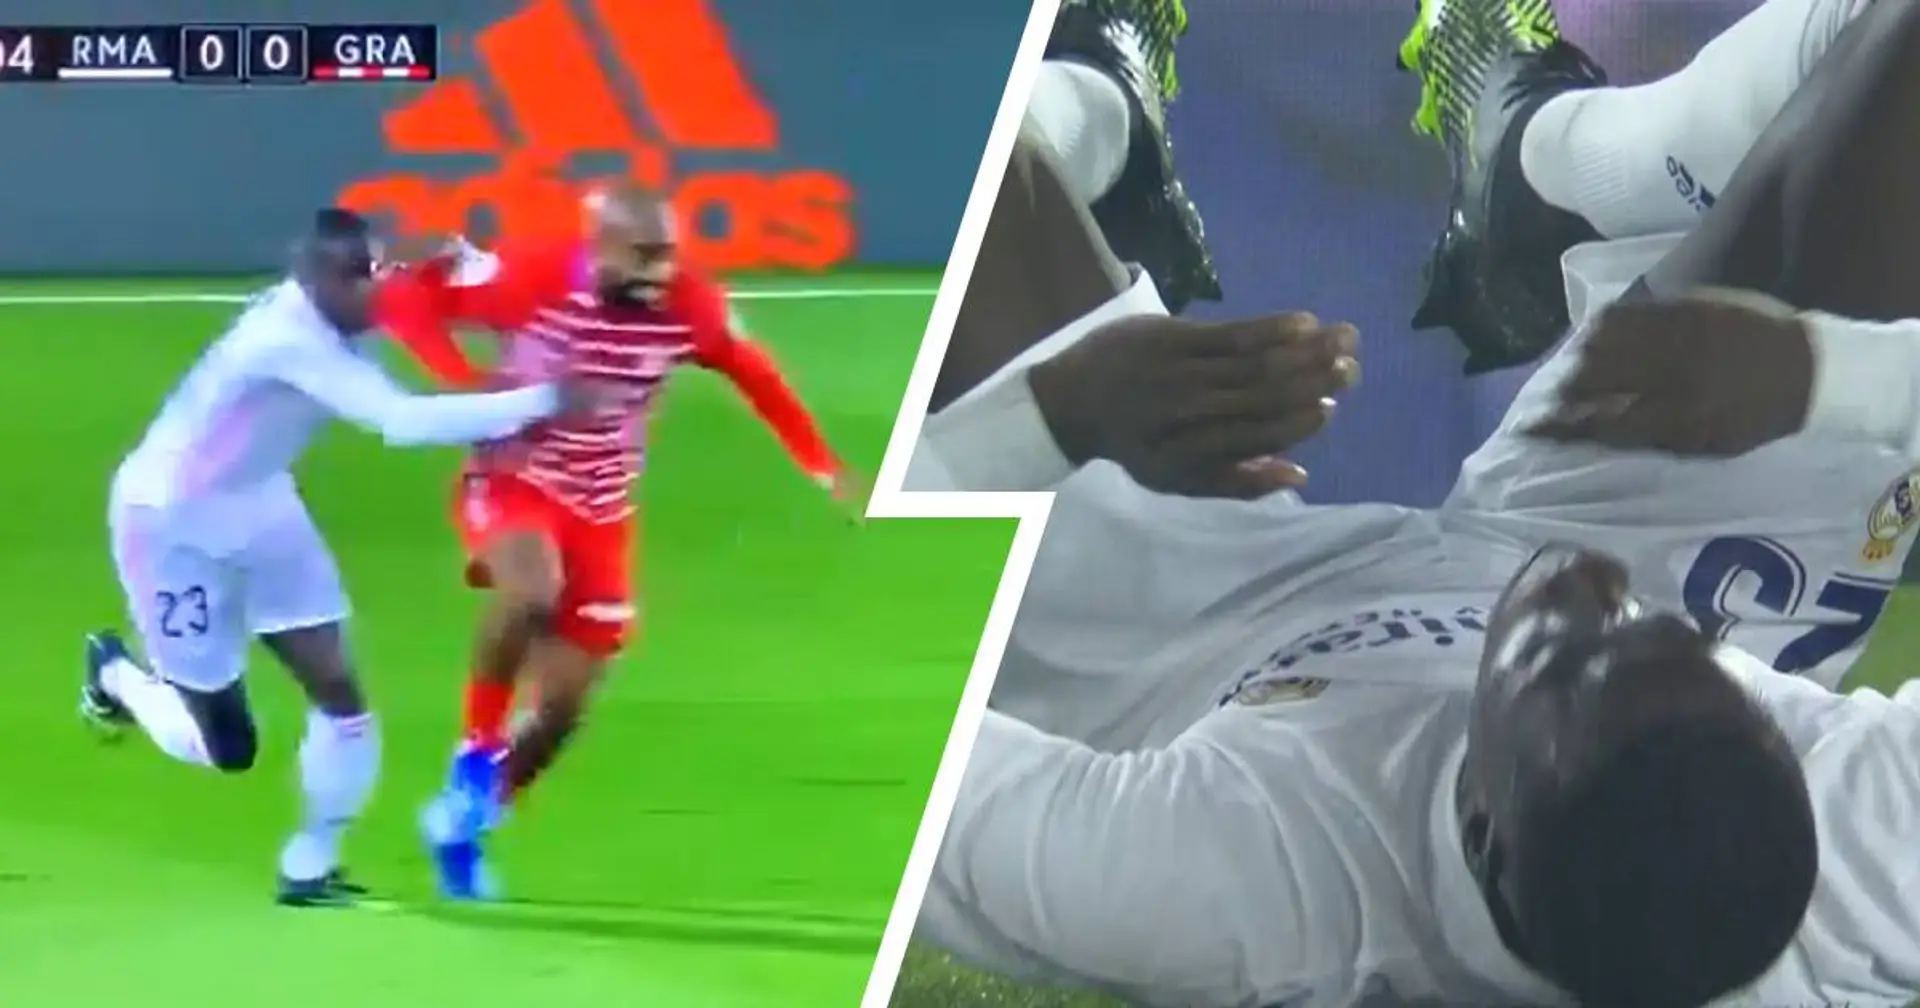 'World would call for Ramos' head if he did this': fan furious Foulquier gets away with elbowing Mendy